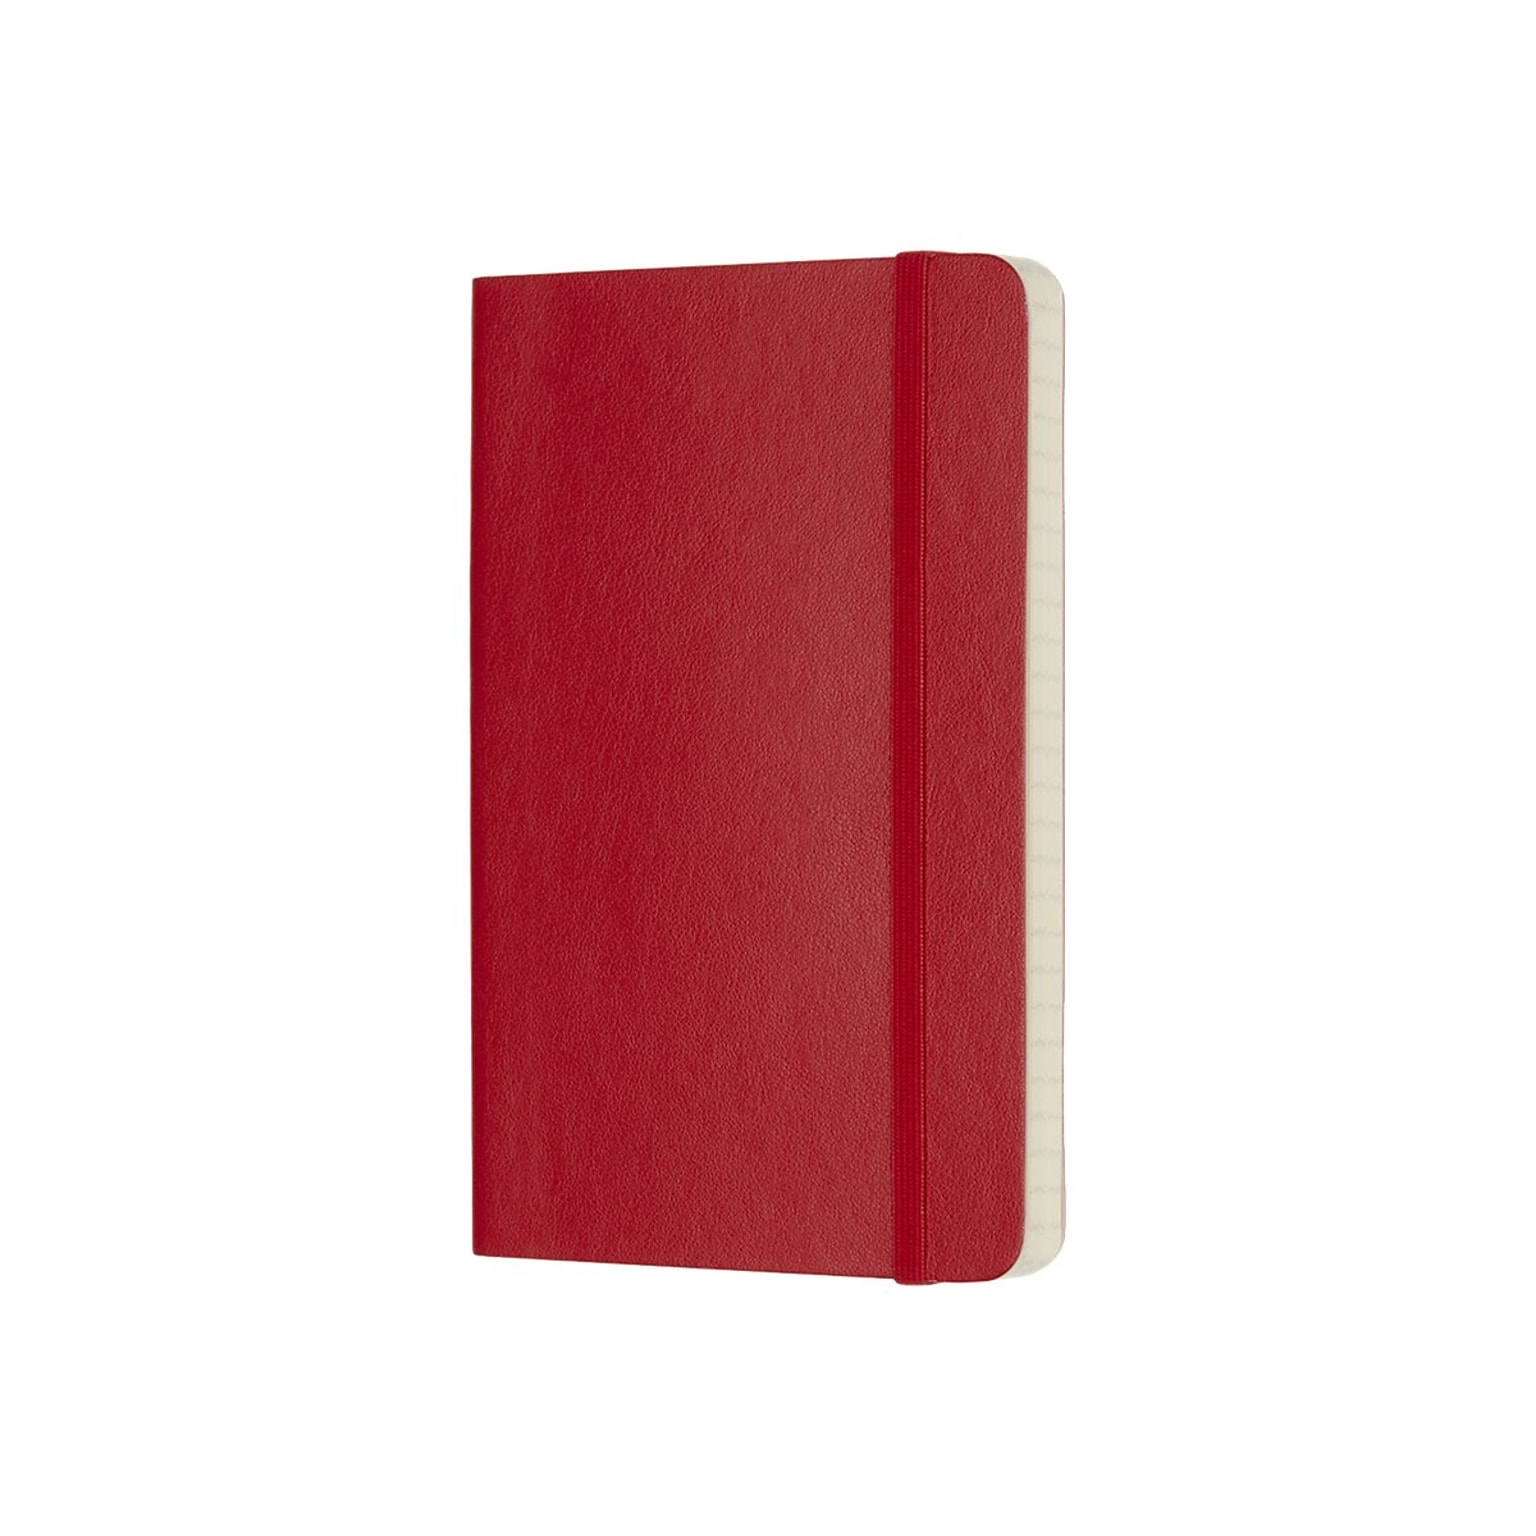 Moleskine Classic Notebook, Soft Cover, Large, 5 x 8.25, College Ruled, 96 Sheets, Scarlet Red (930048)